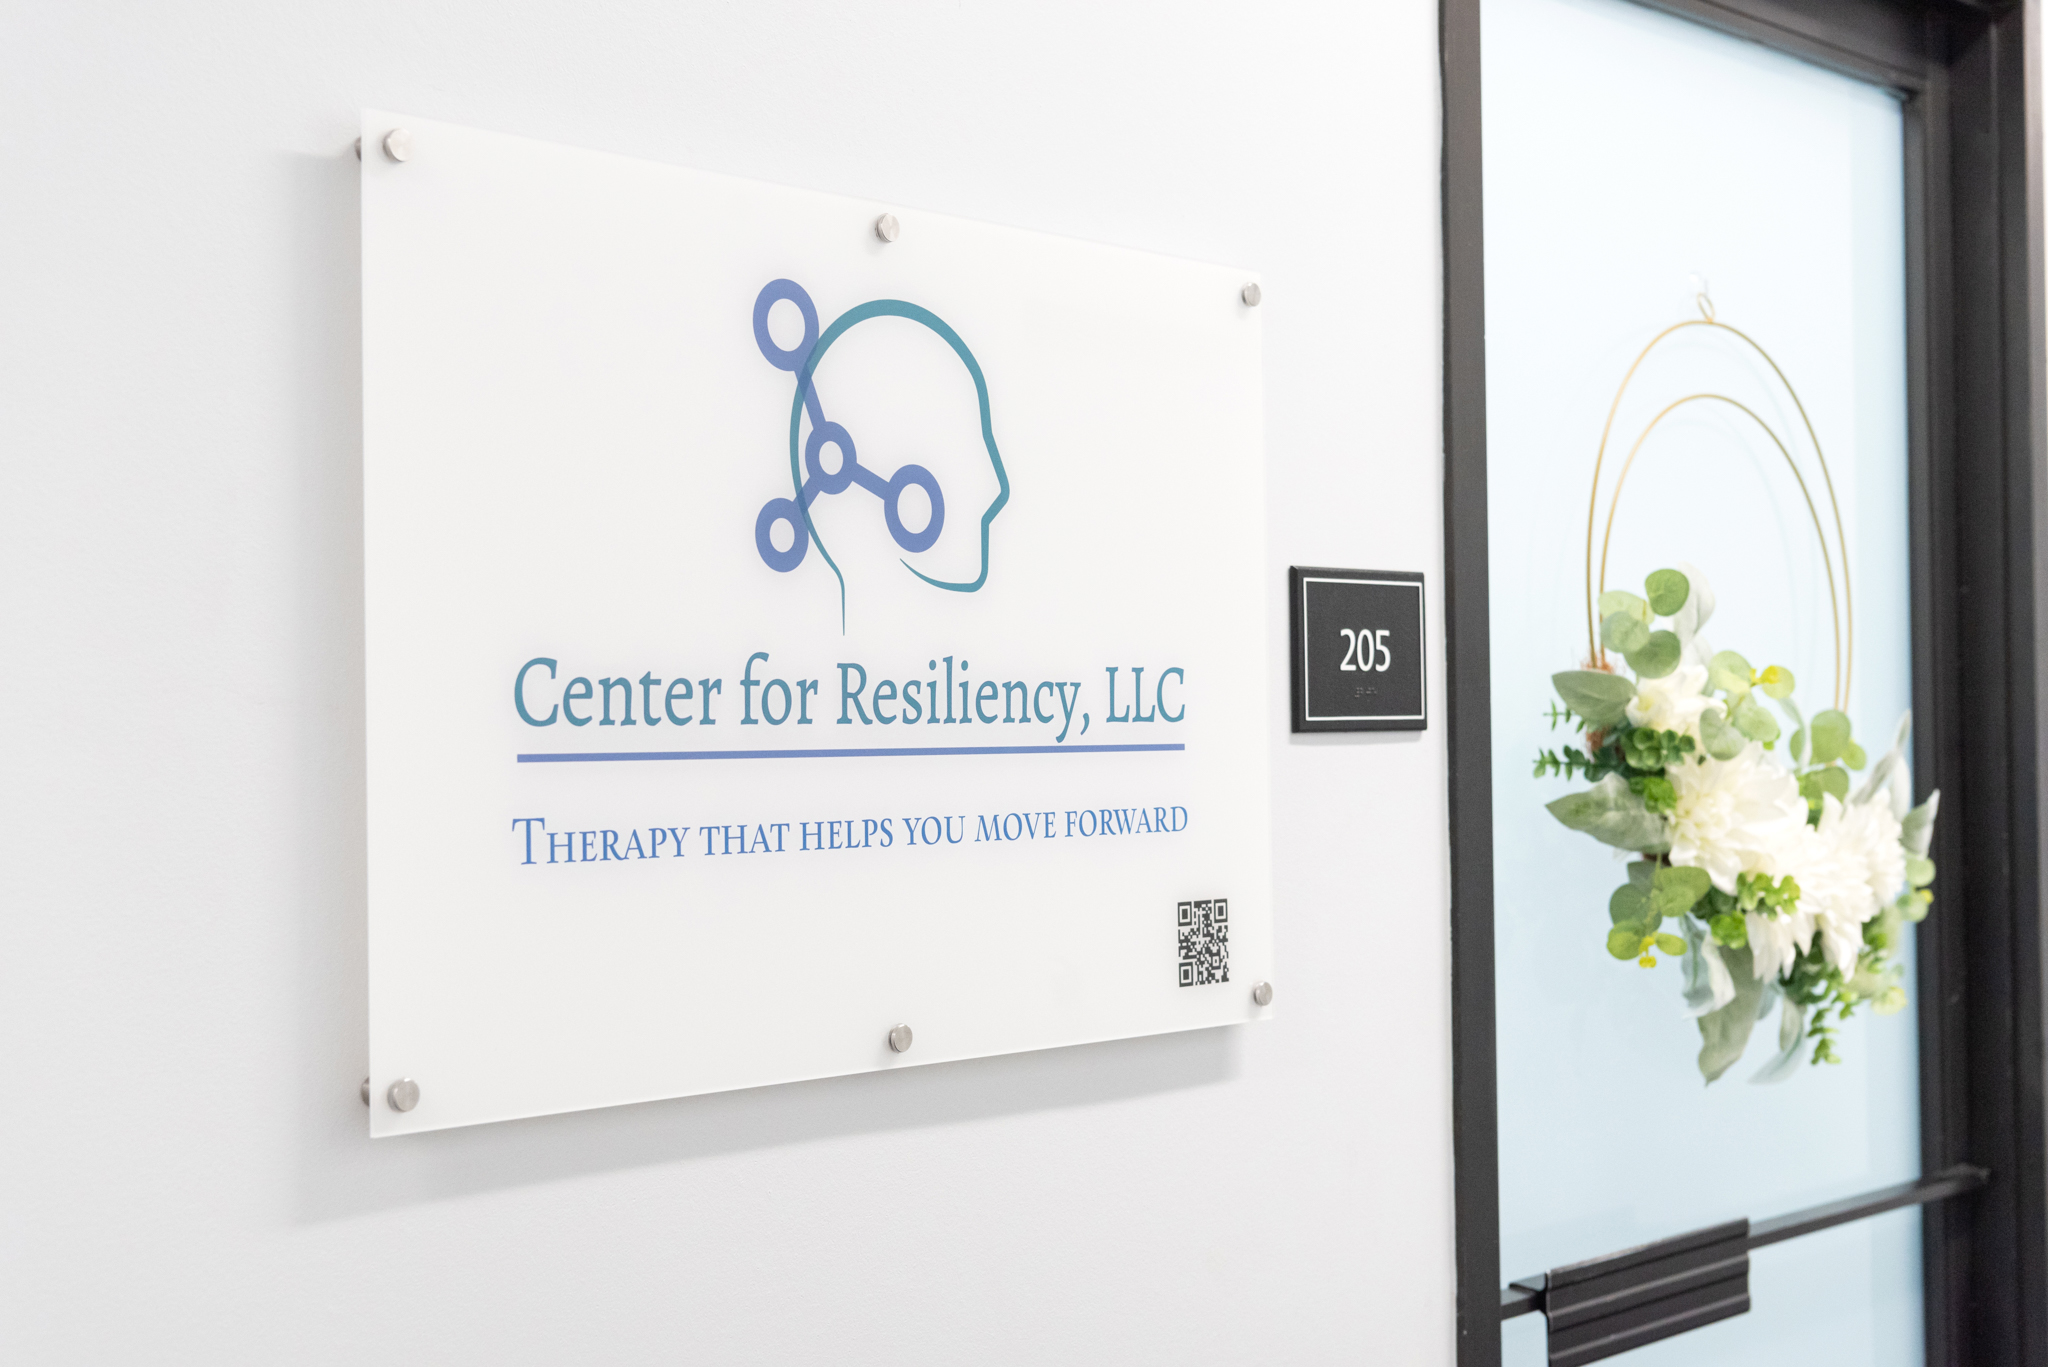 A sign to a female psychologist office - "Center for Resiliency"